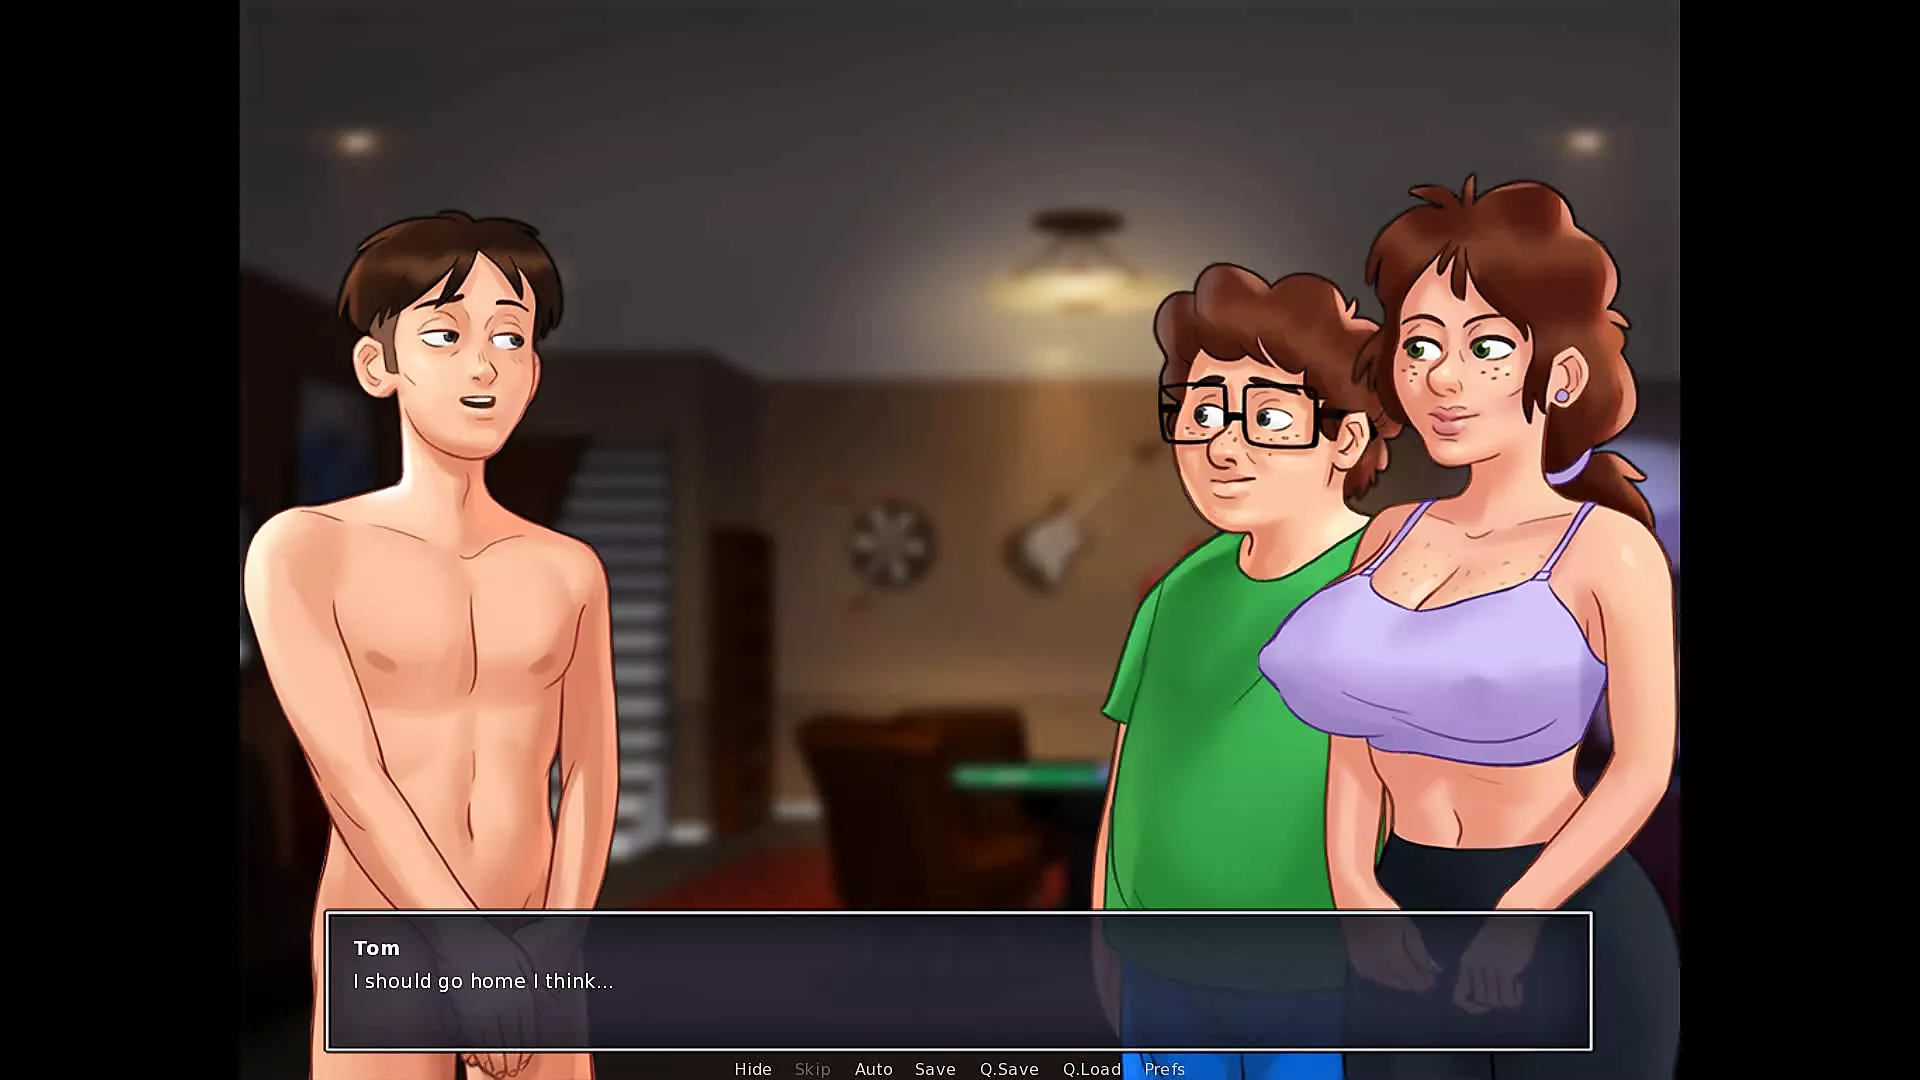 Summertime Saga Playing Strip Poker With The MILF picture